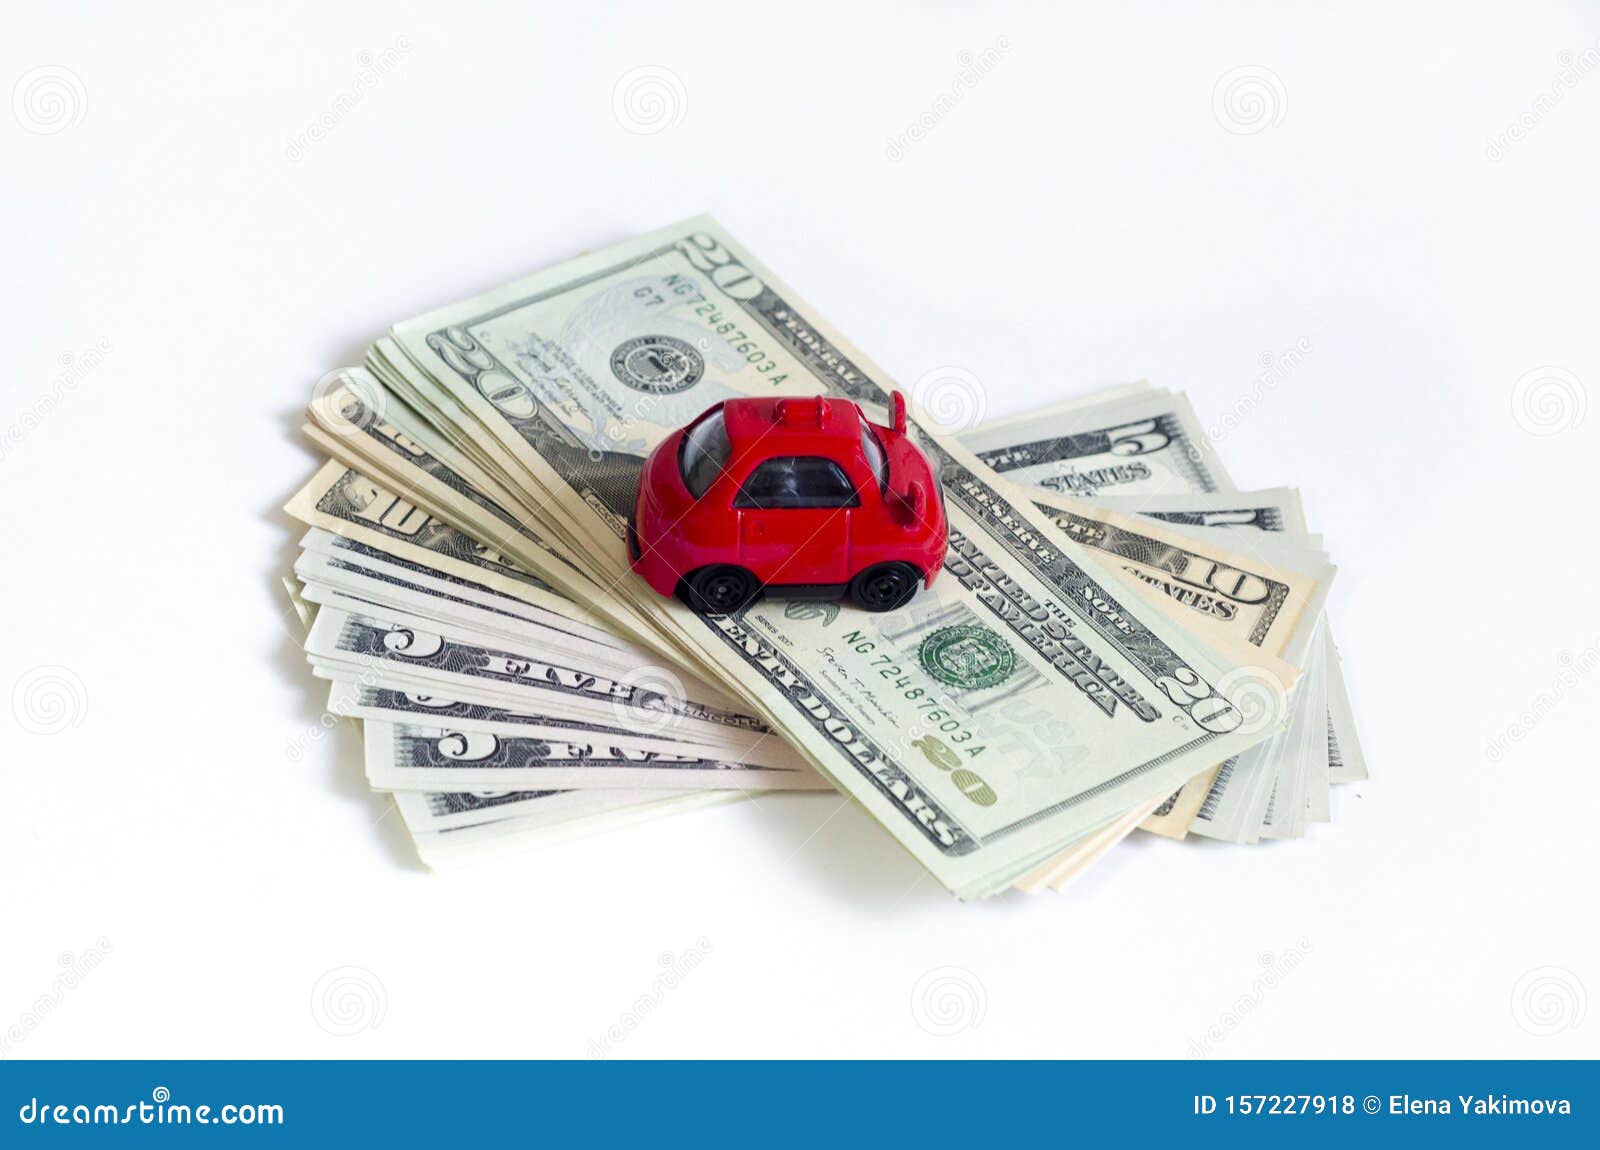 Toy Red Car and a Stack of Money Dollar Bills American Dollars on